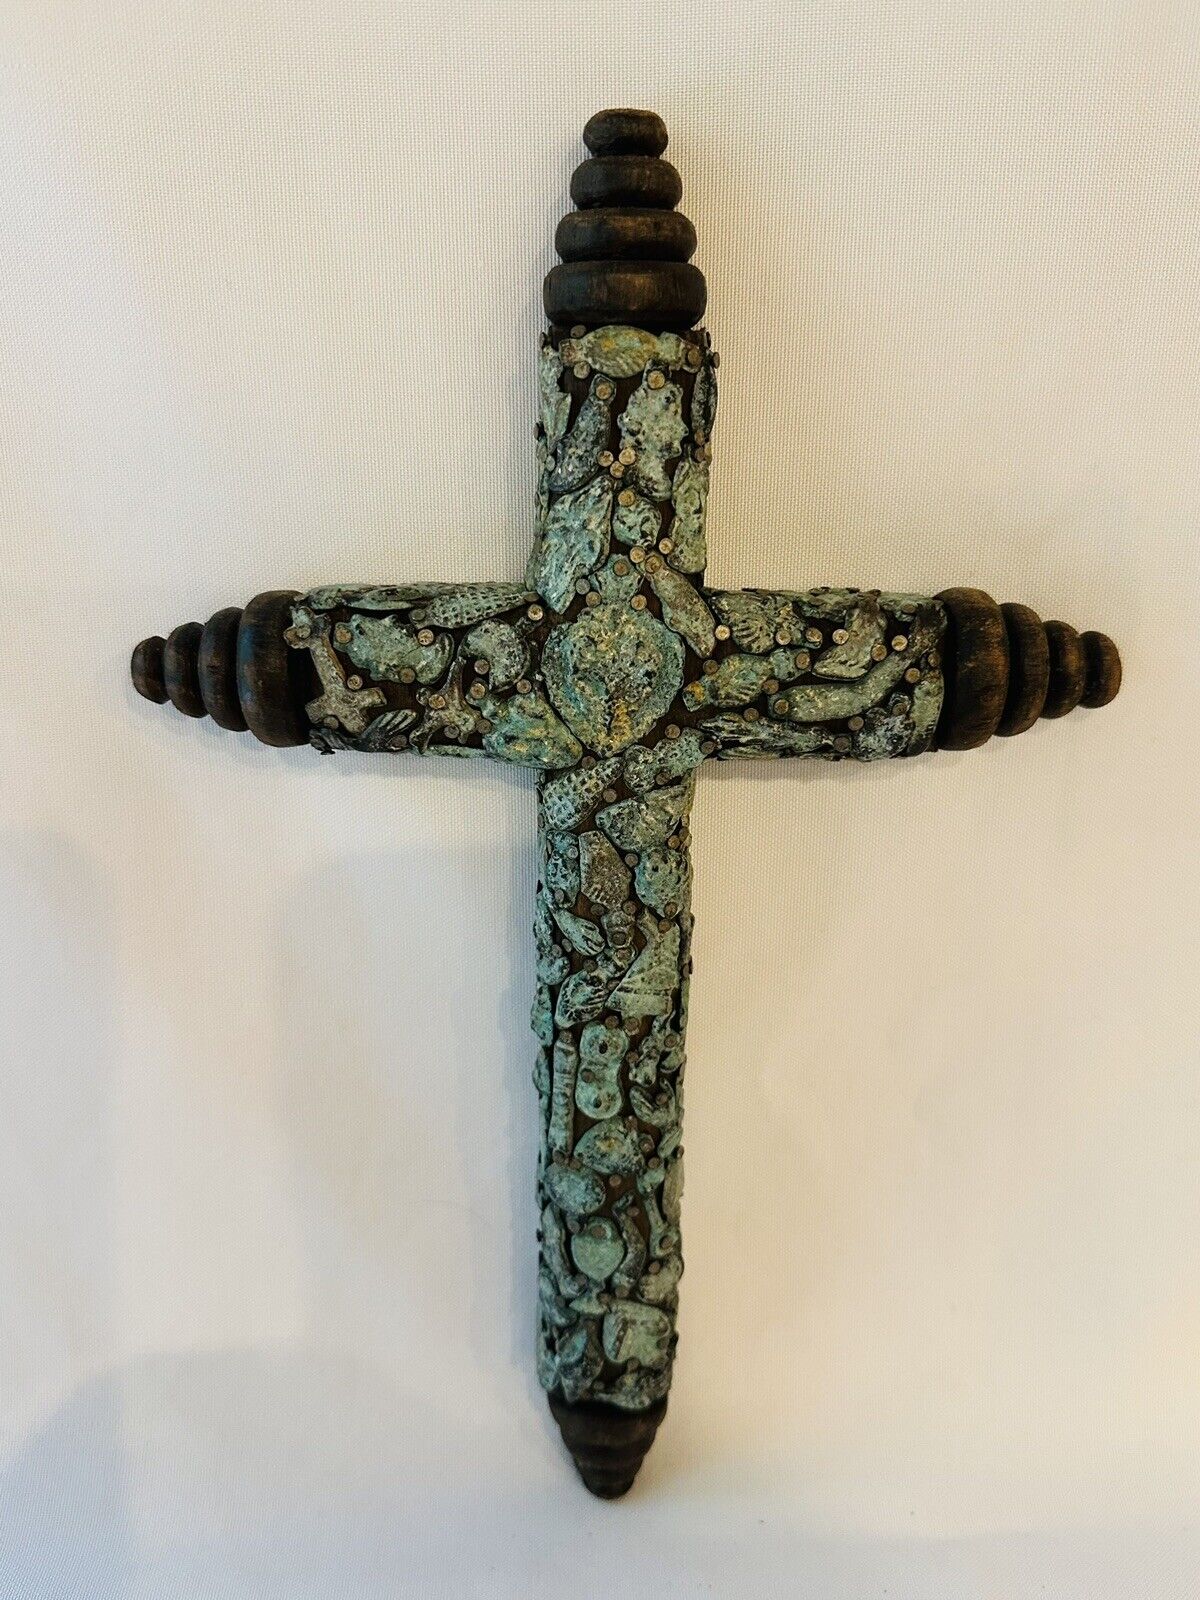 Vintage Half Round Wood Milagros Cross Hand Made Hecho en Mexico Green Patina